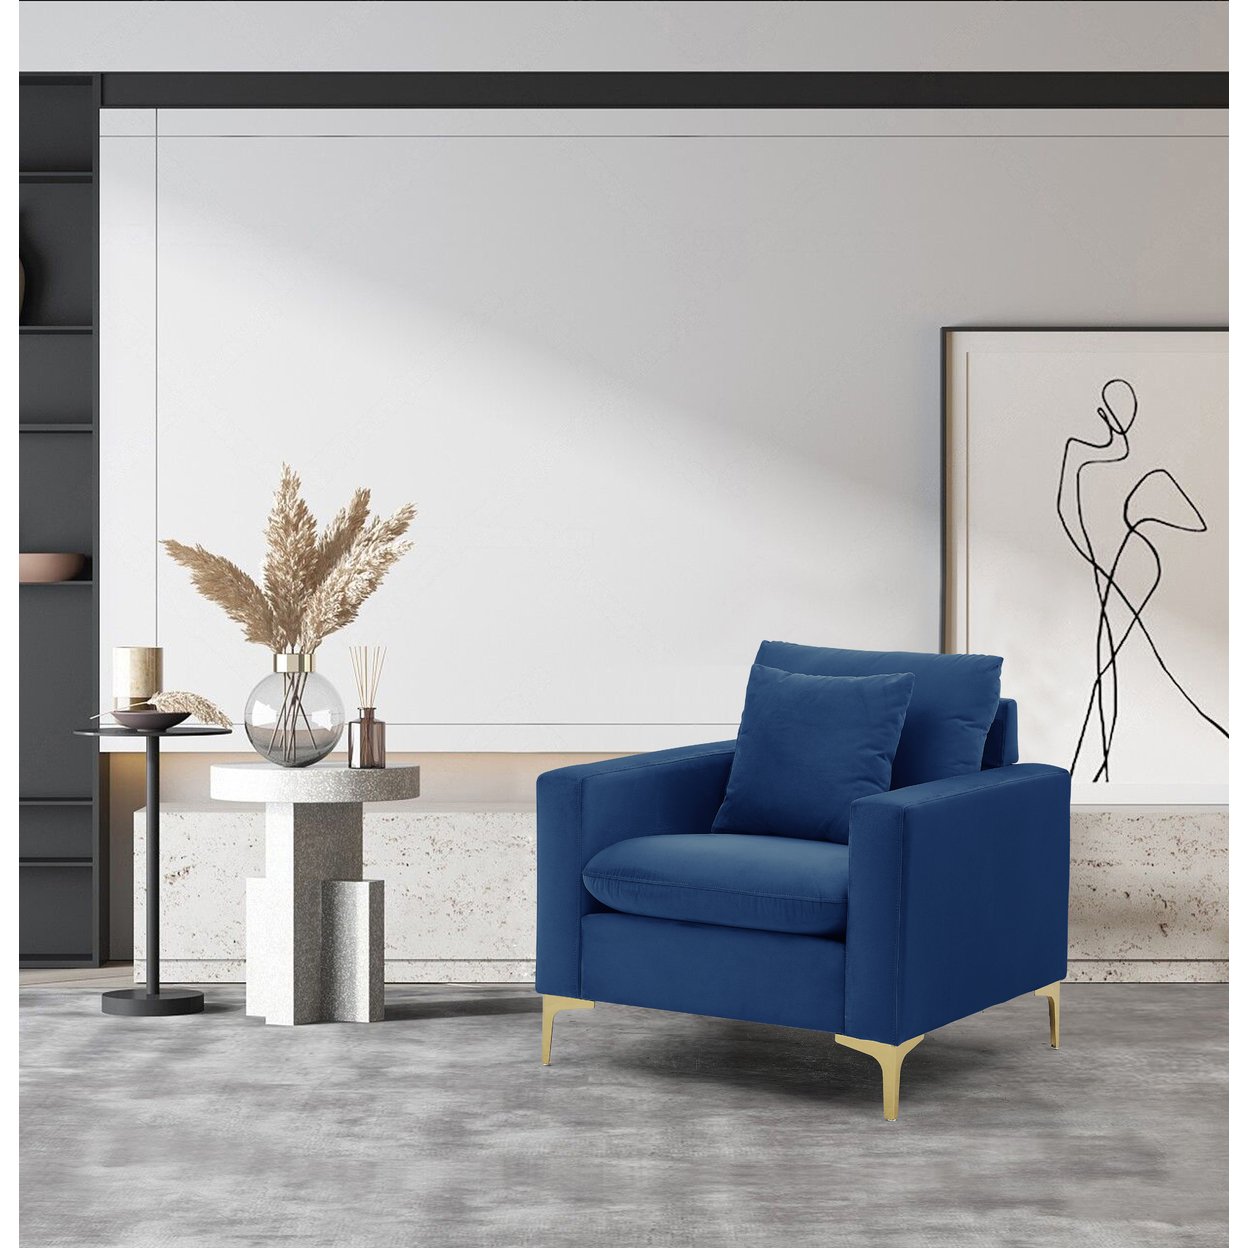 Iconic Home Roxi Club Chair Velvet Upholstered Loose Back Design Gold Tone Metal Y-Legs With Decorative Pillow - Blue